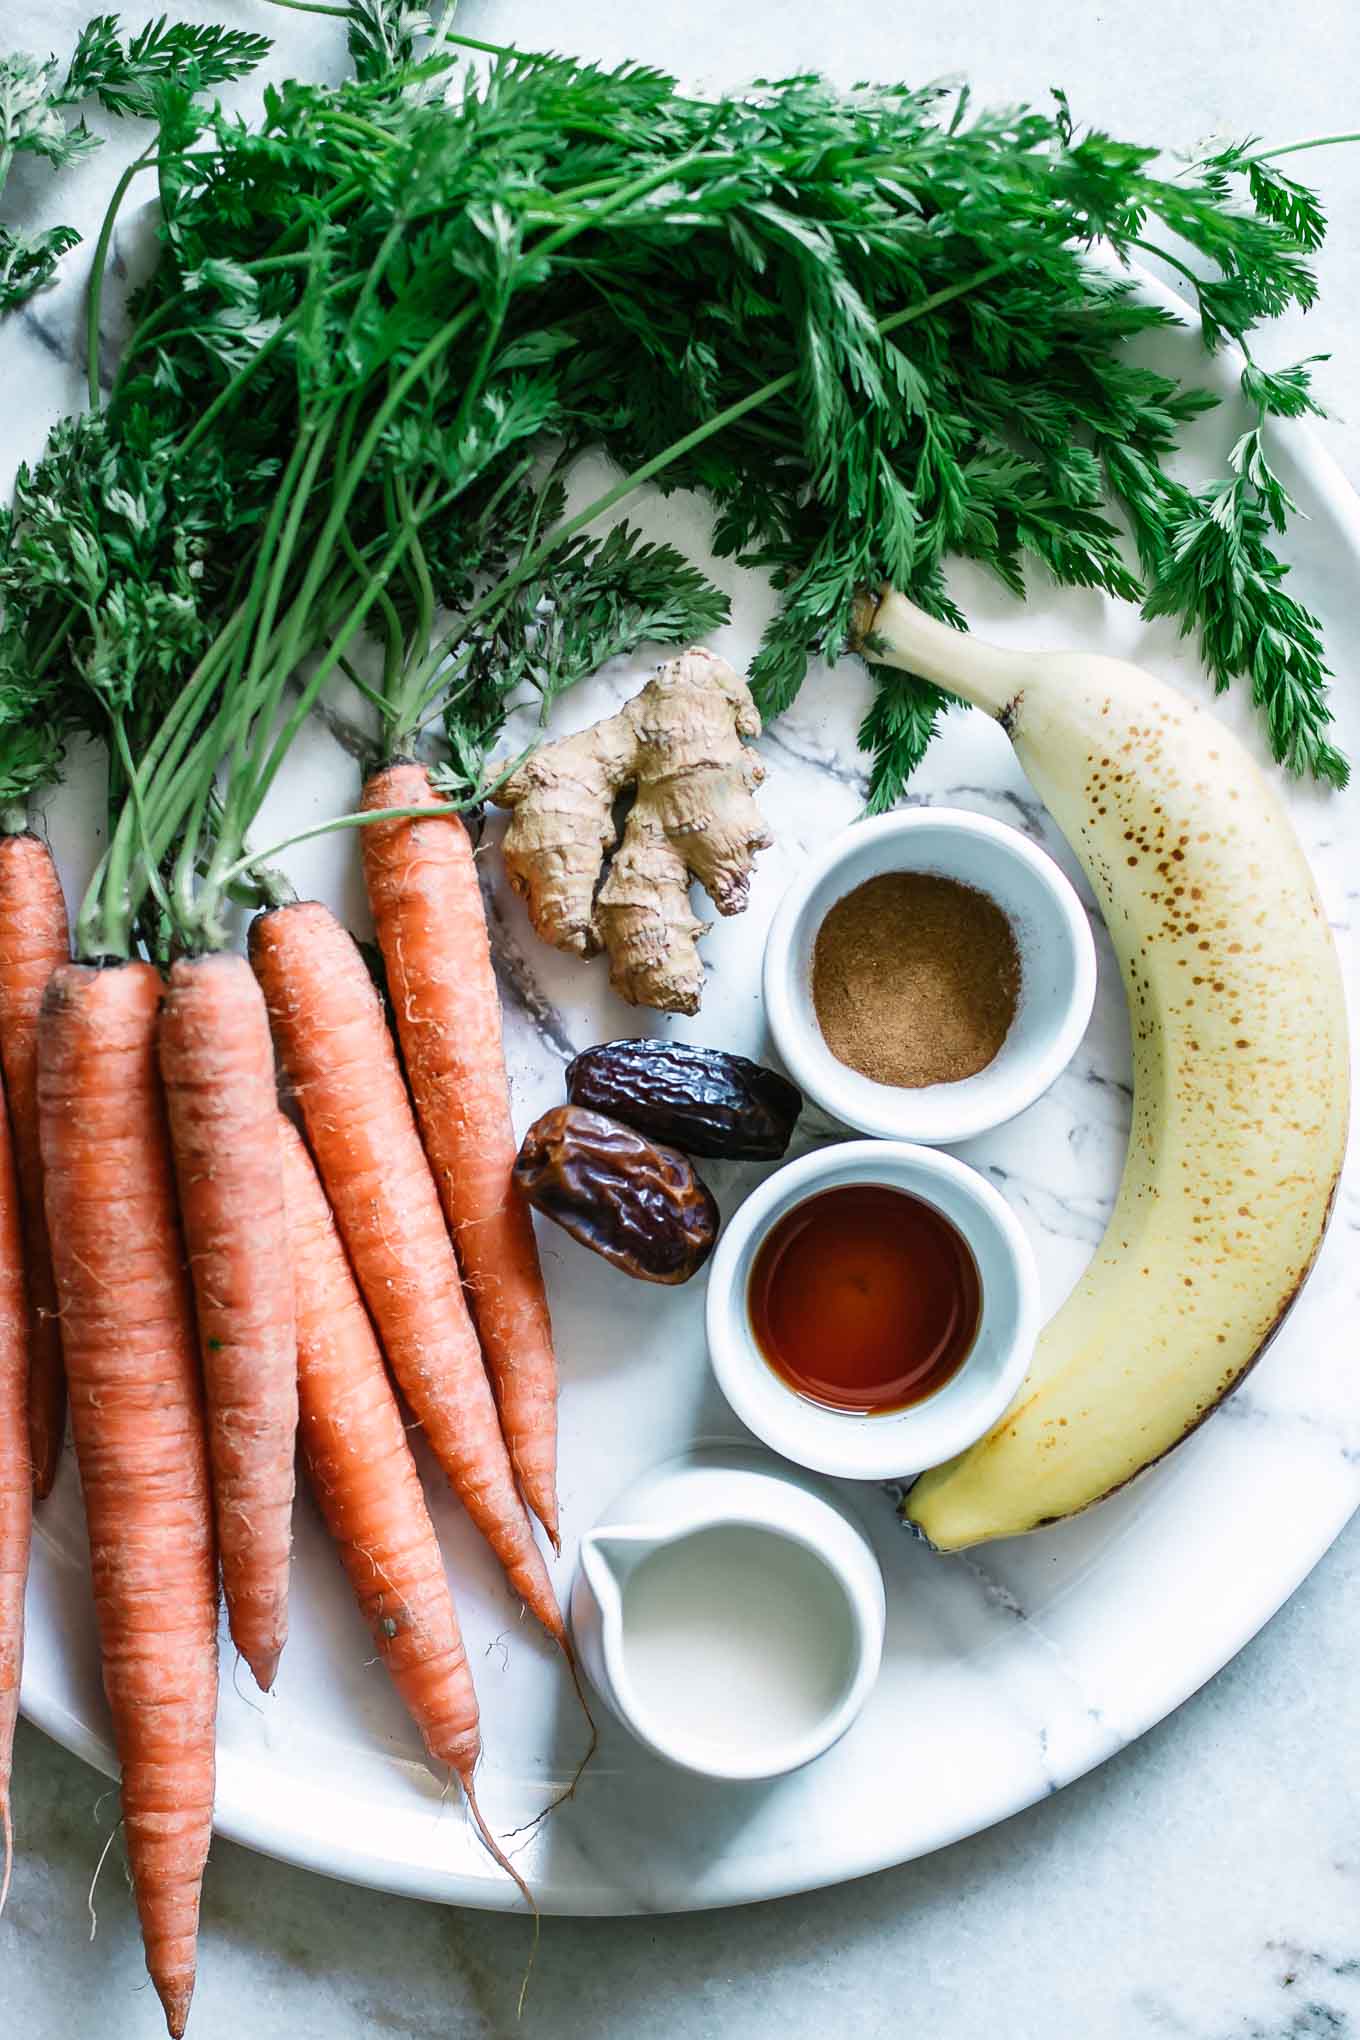 carrots, banana, ginger, dates, and bowls of spices on a white table